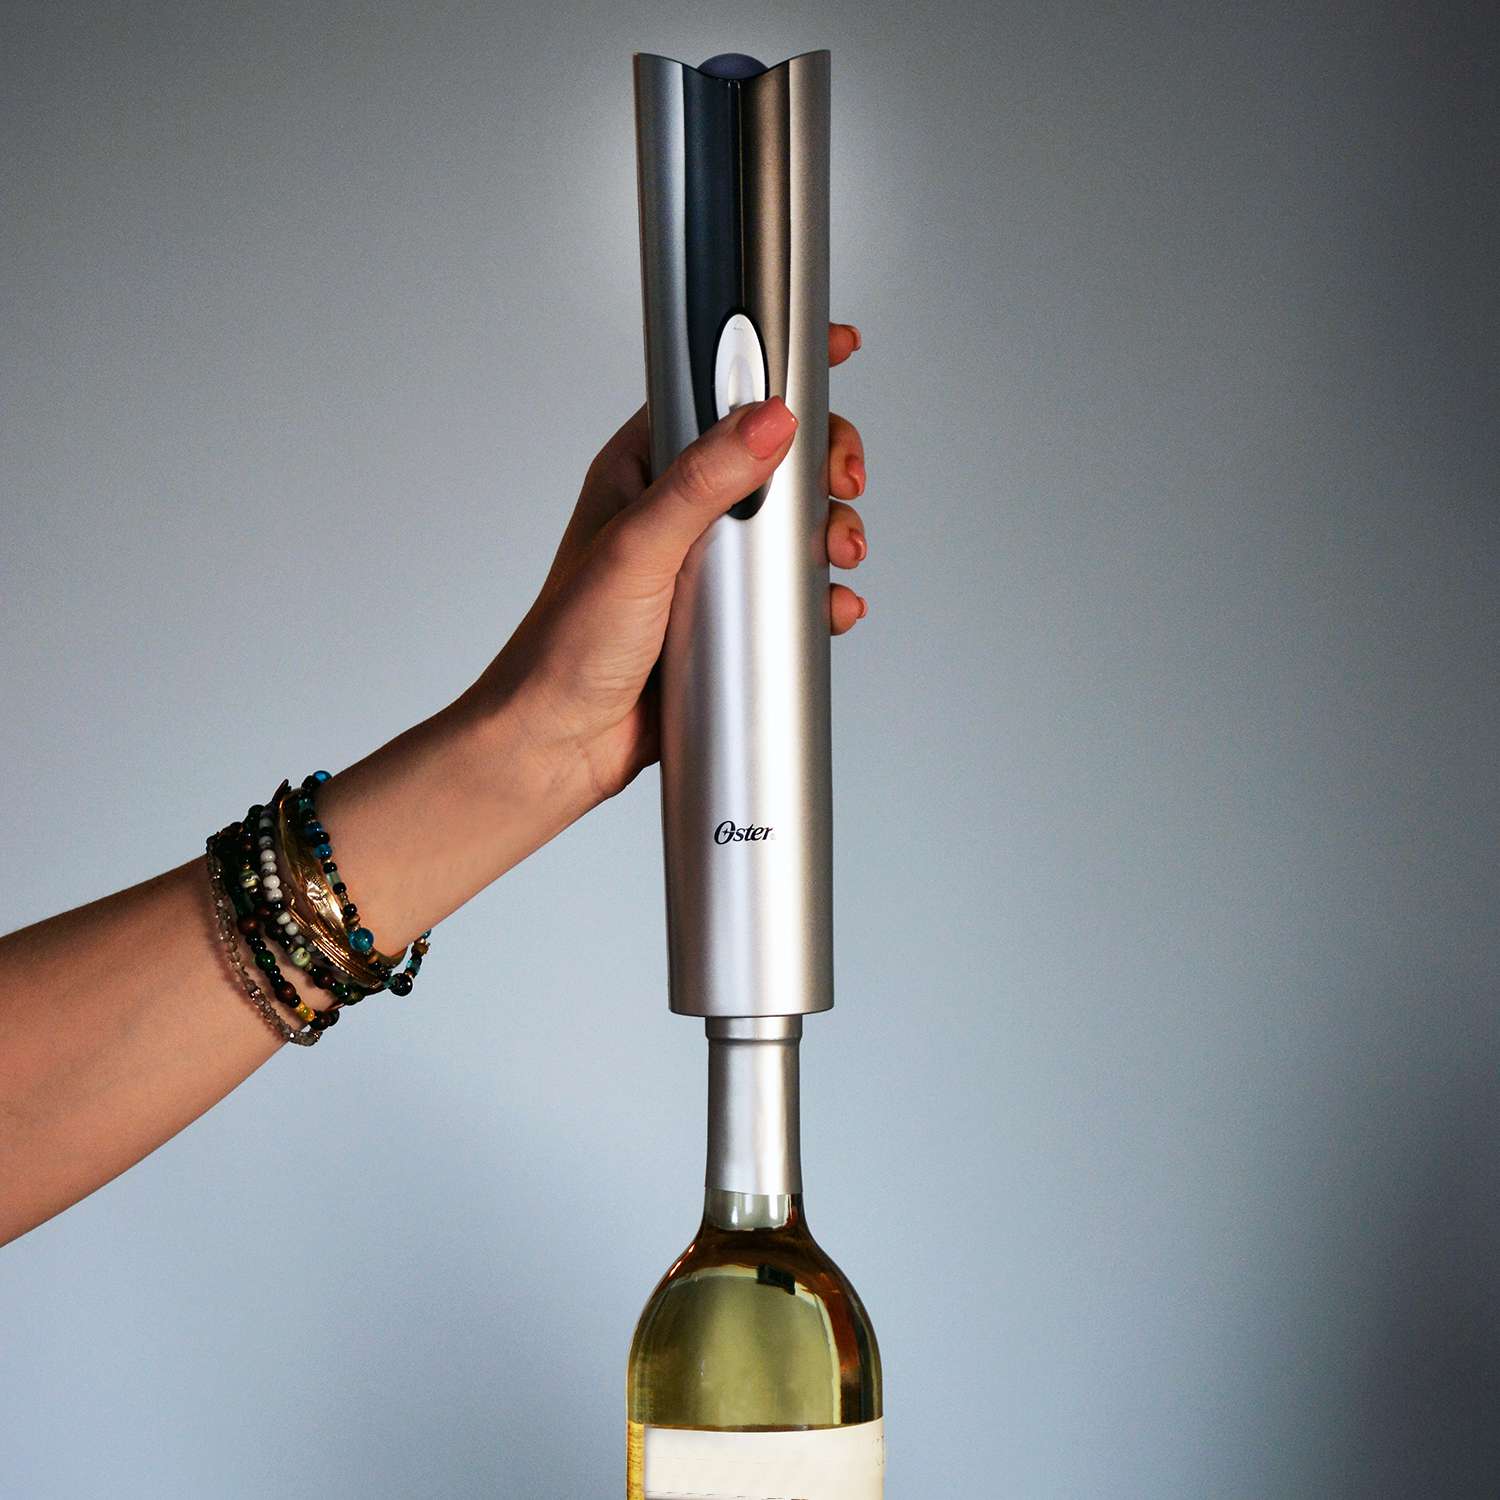 How To Use An Oster Wine Opener